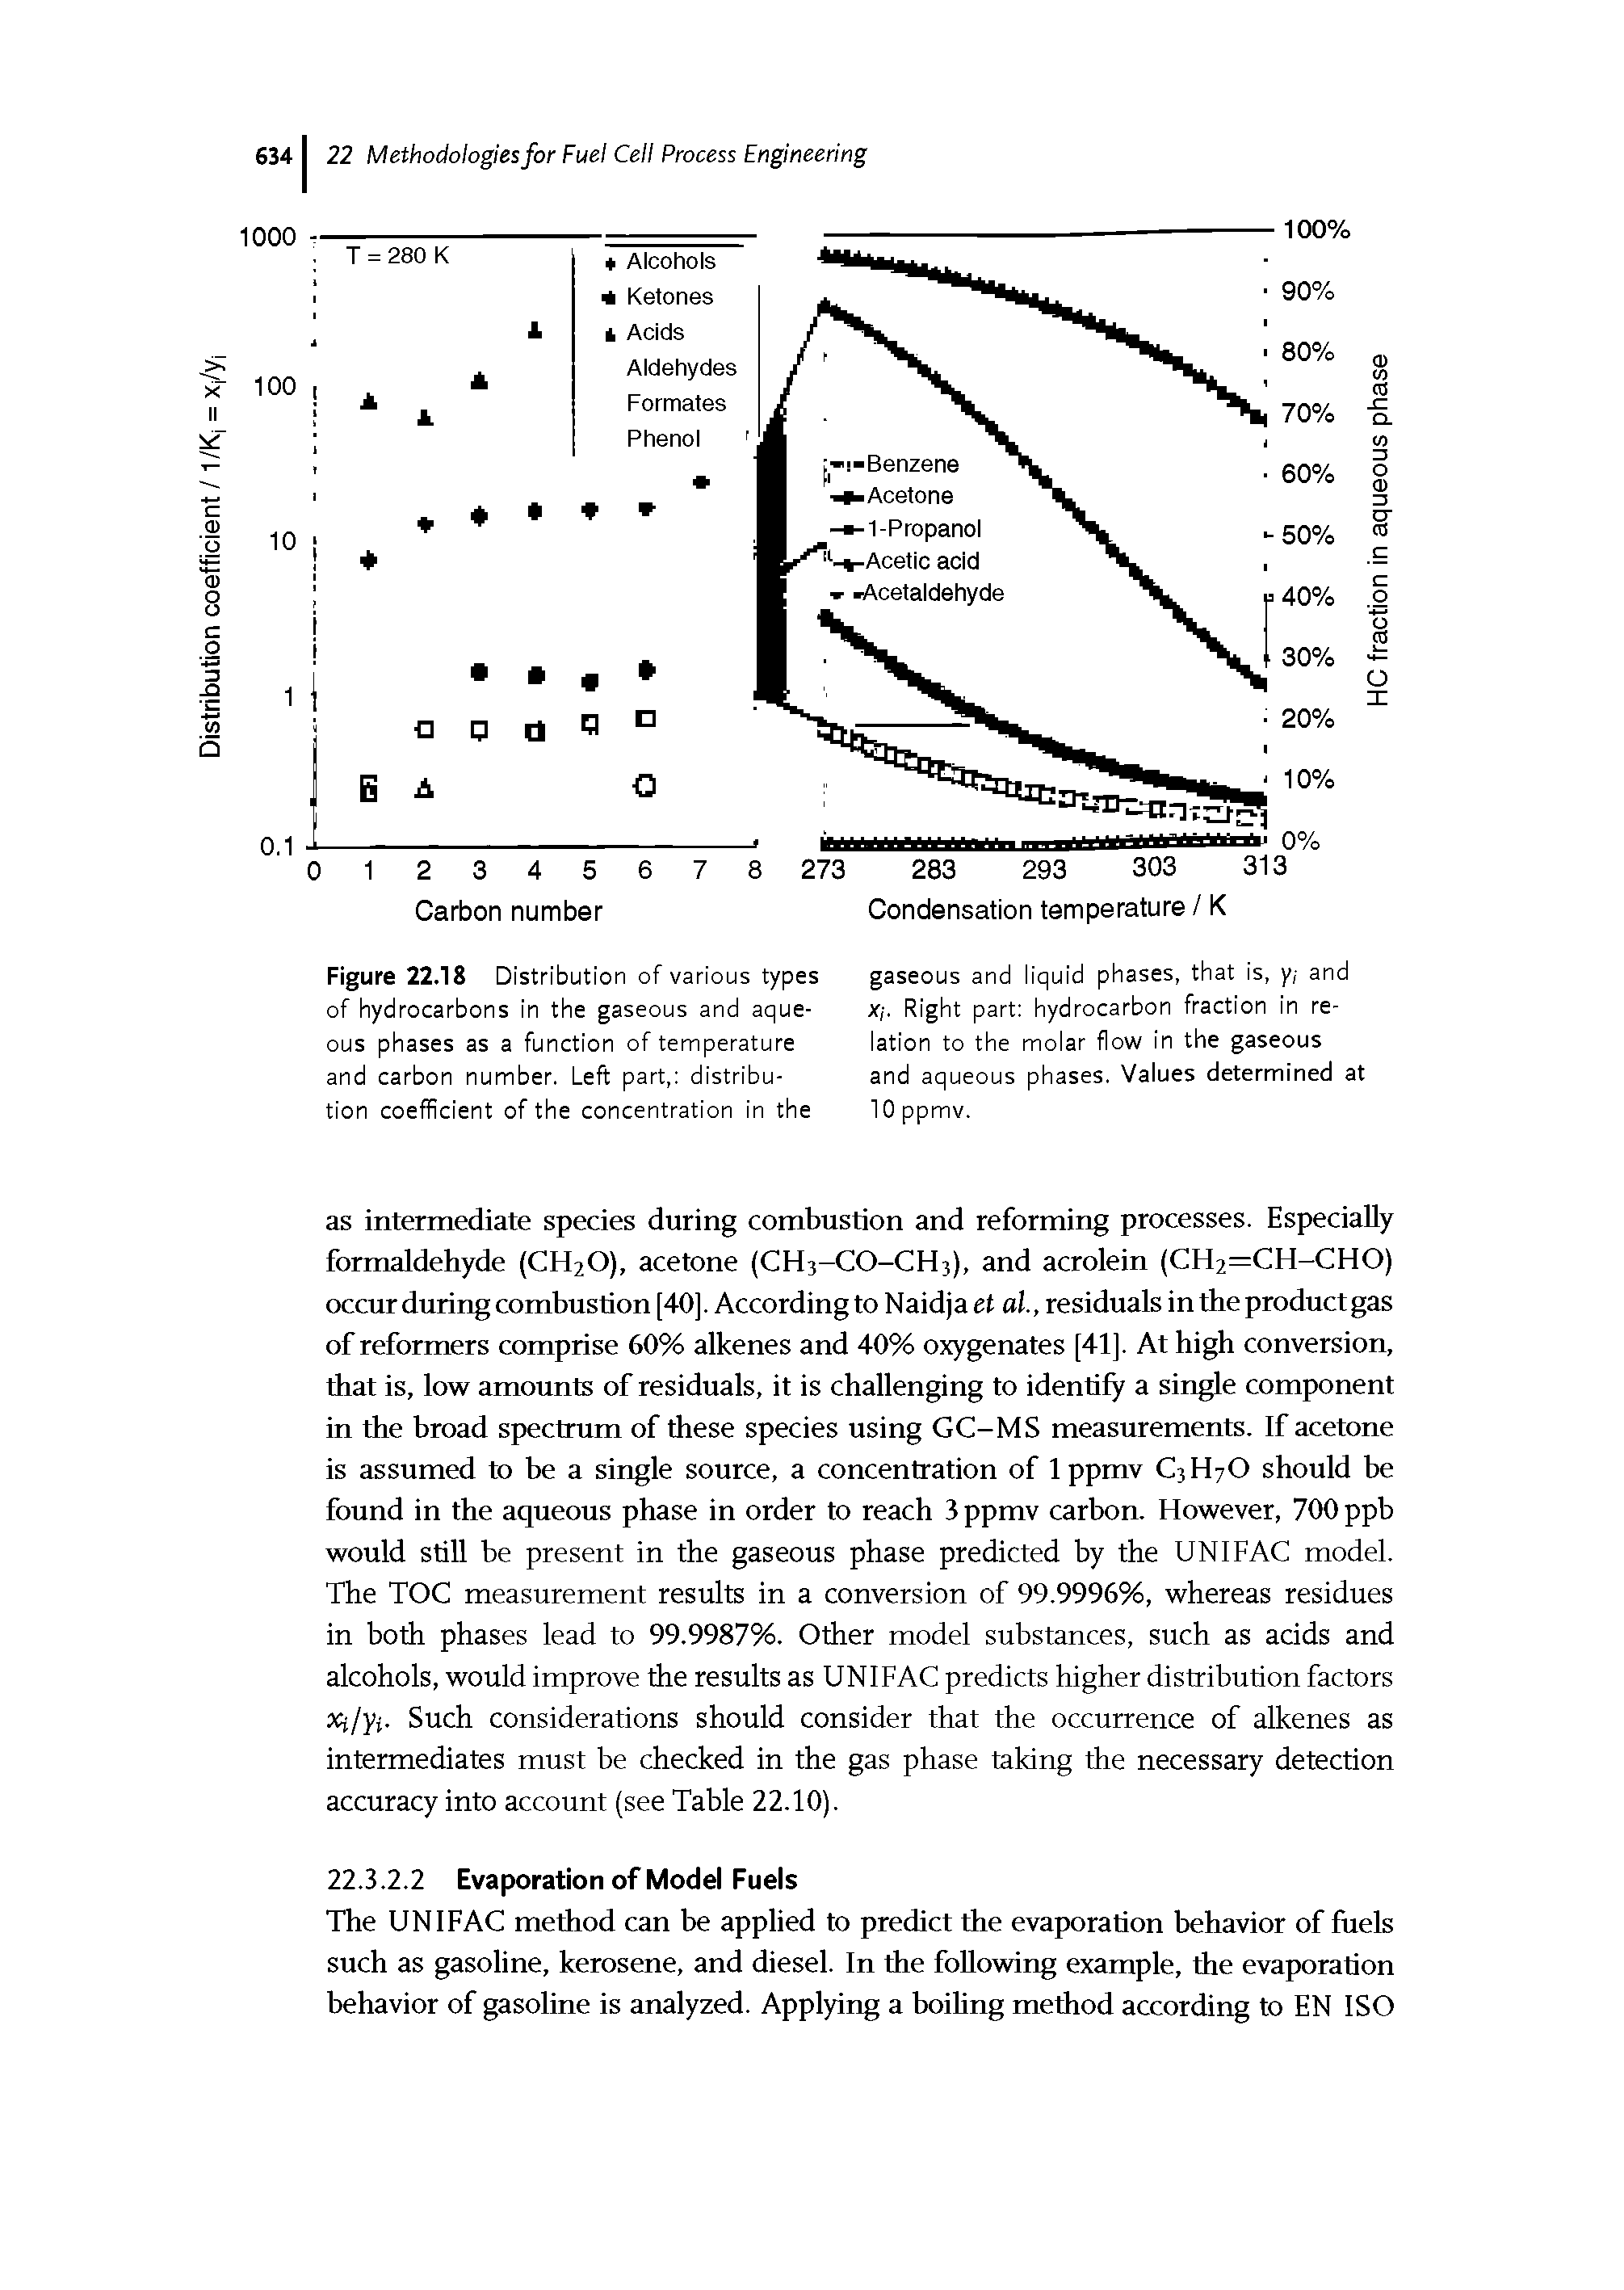 Figure 22.18 Distribution of various types of hydrocarbons in the gaseous and aqueous phases as a function of temperature and carbon number. Left part, distribution coefficient of the concentration in the...